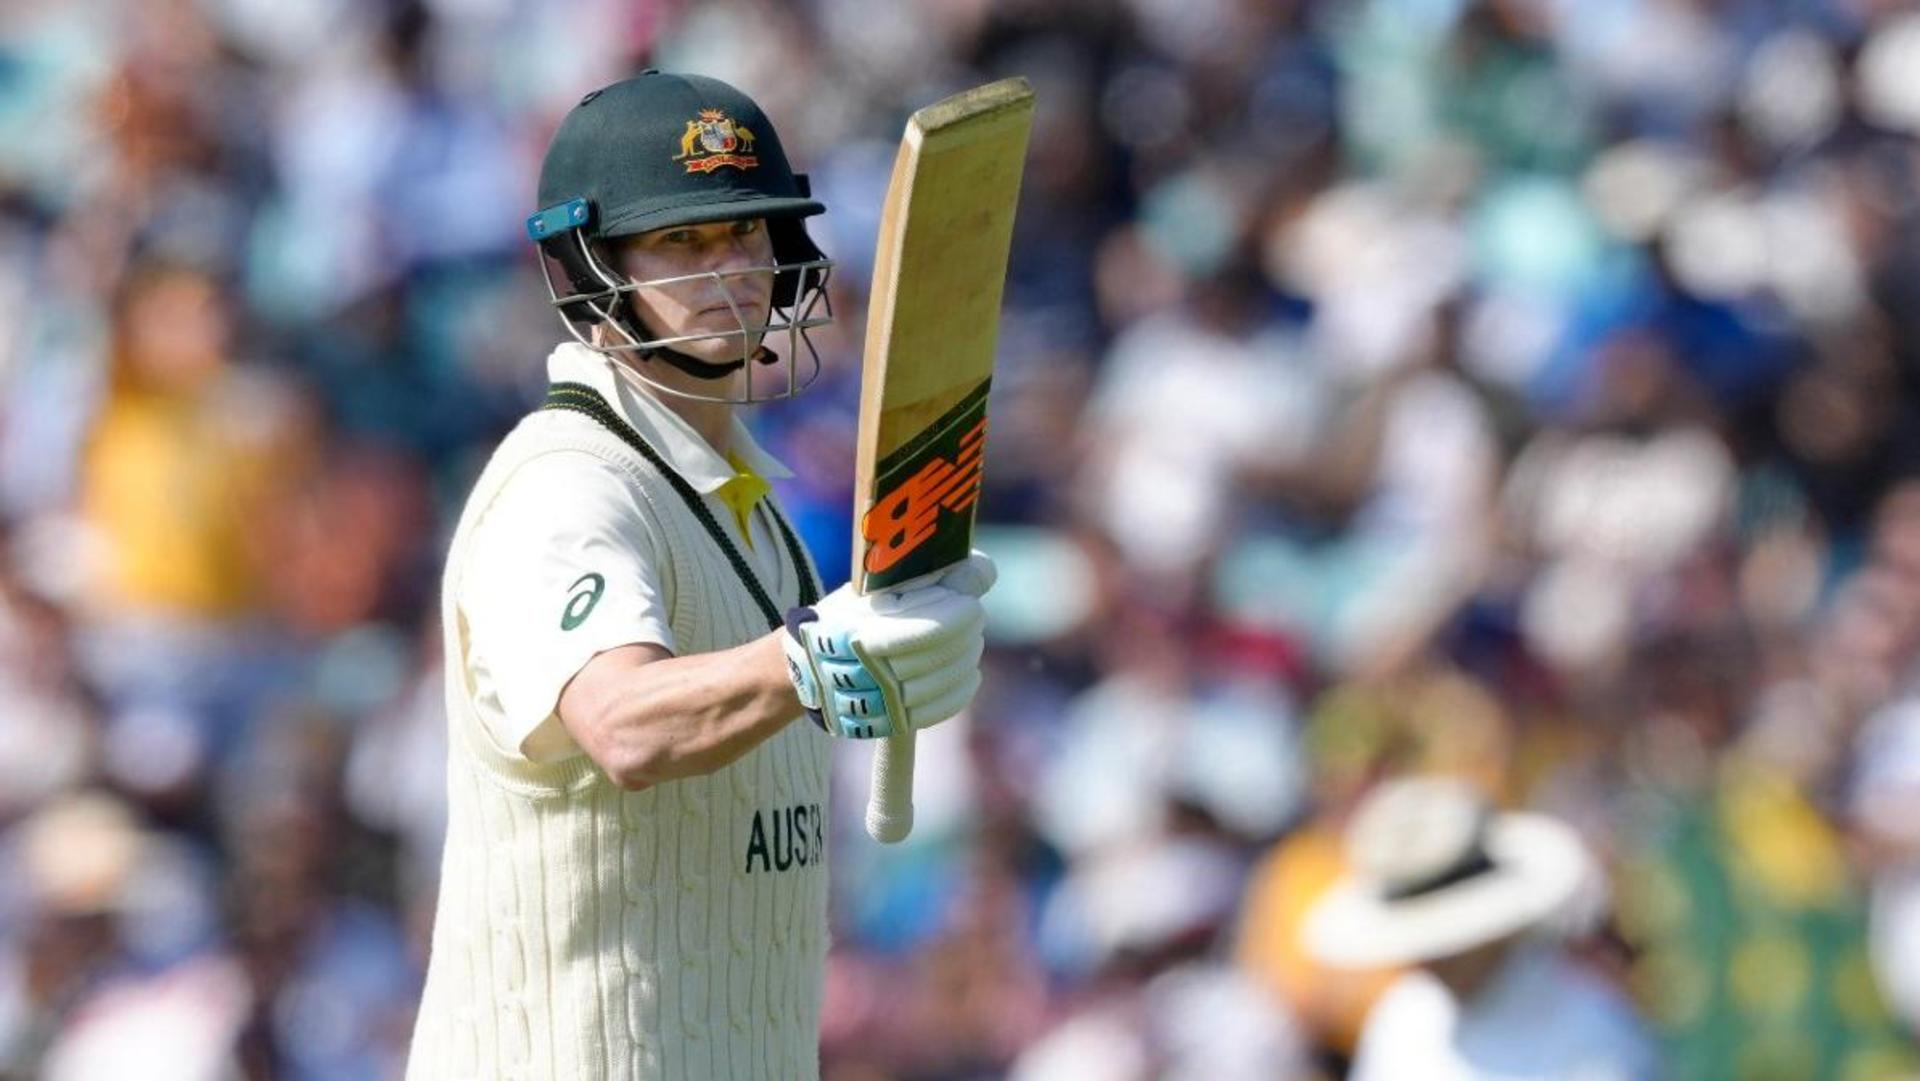 The Ashes: Steven Smith set to unlock these achievements